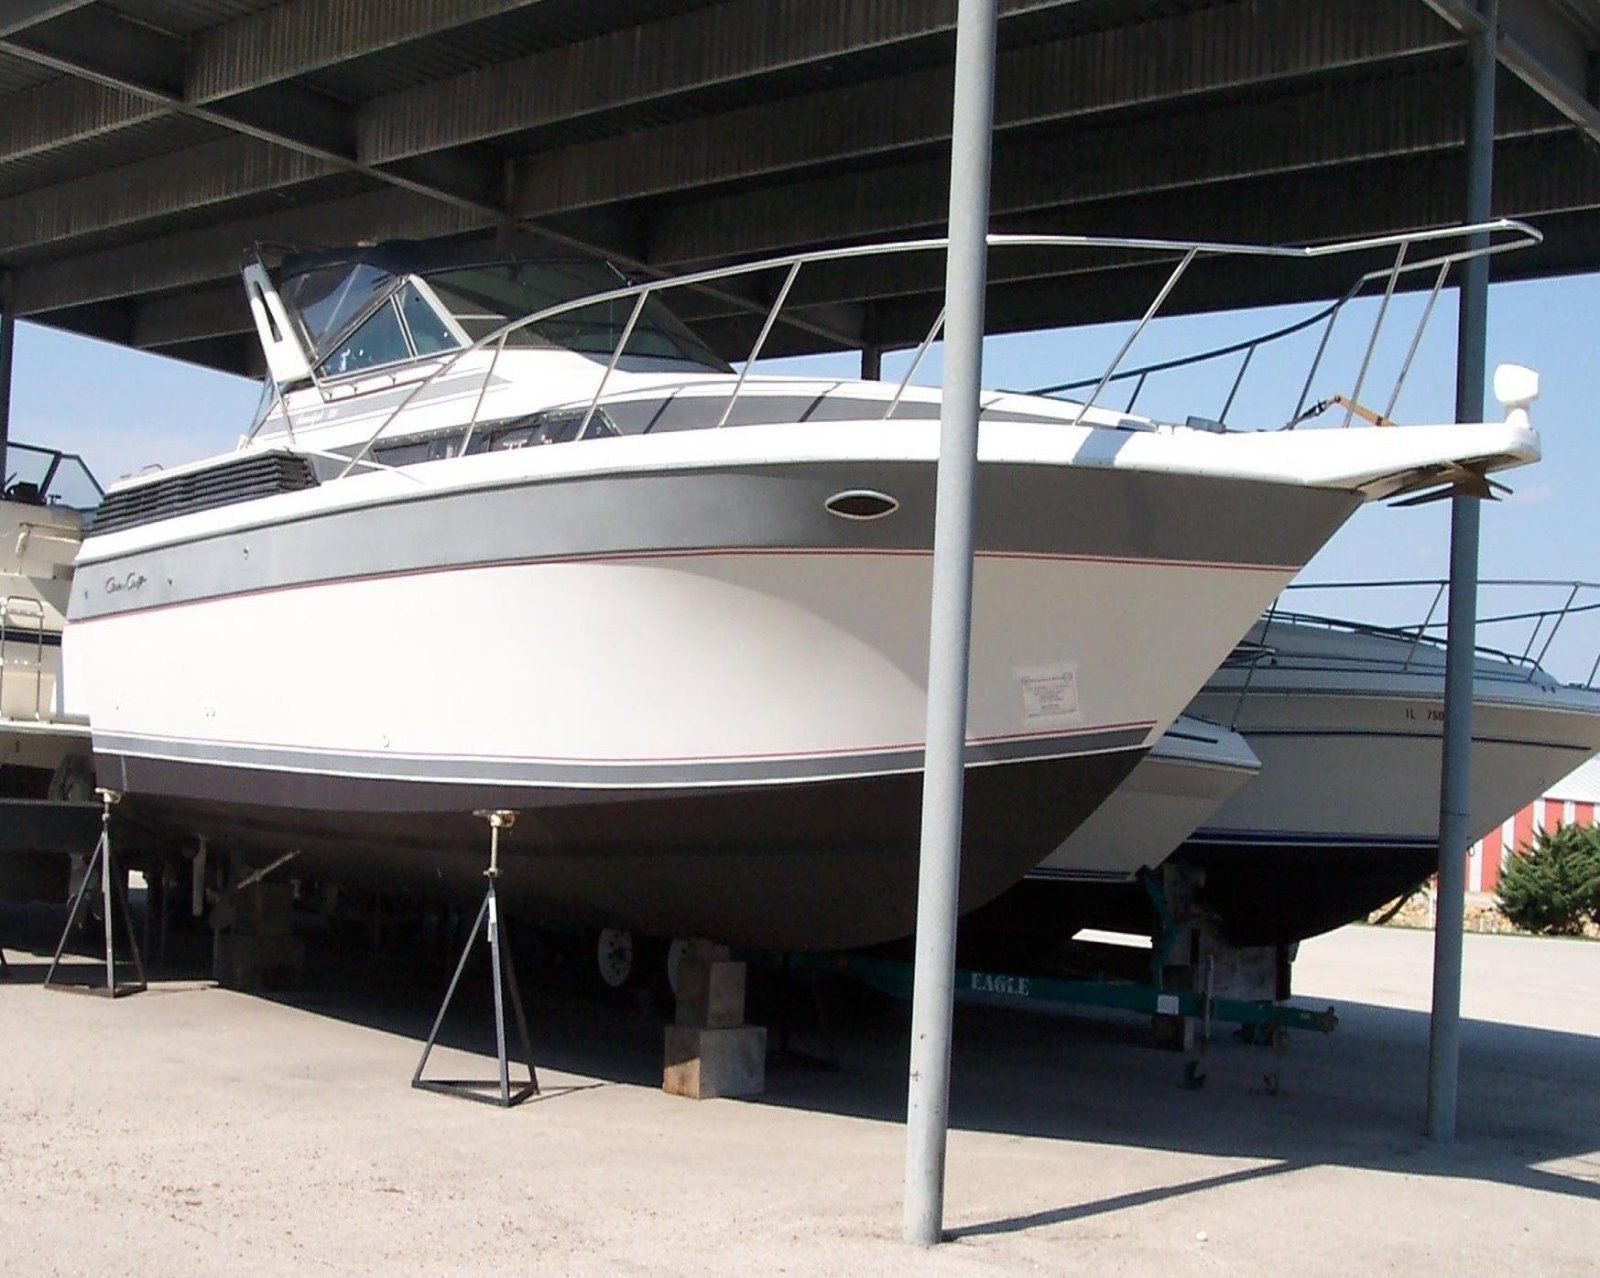 Chris Craft 1987 for sale for $10,000 - Boats-from-USA.com